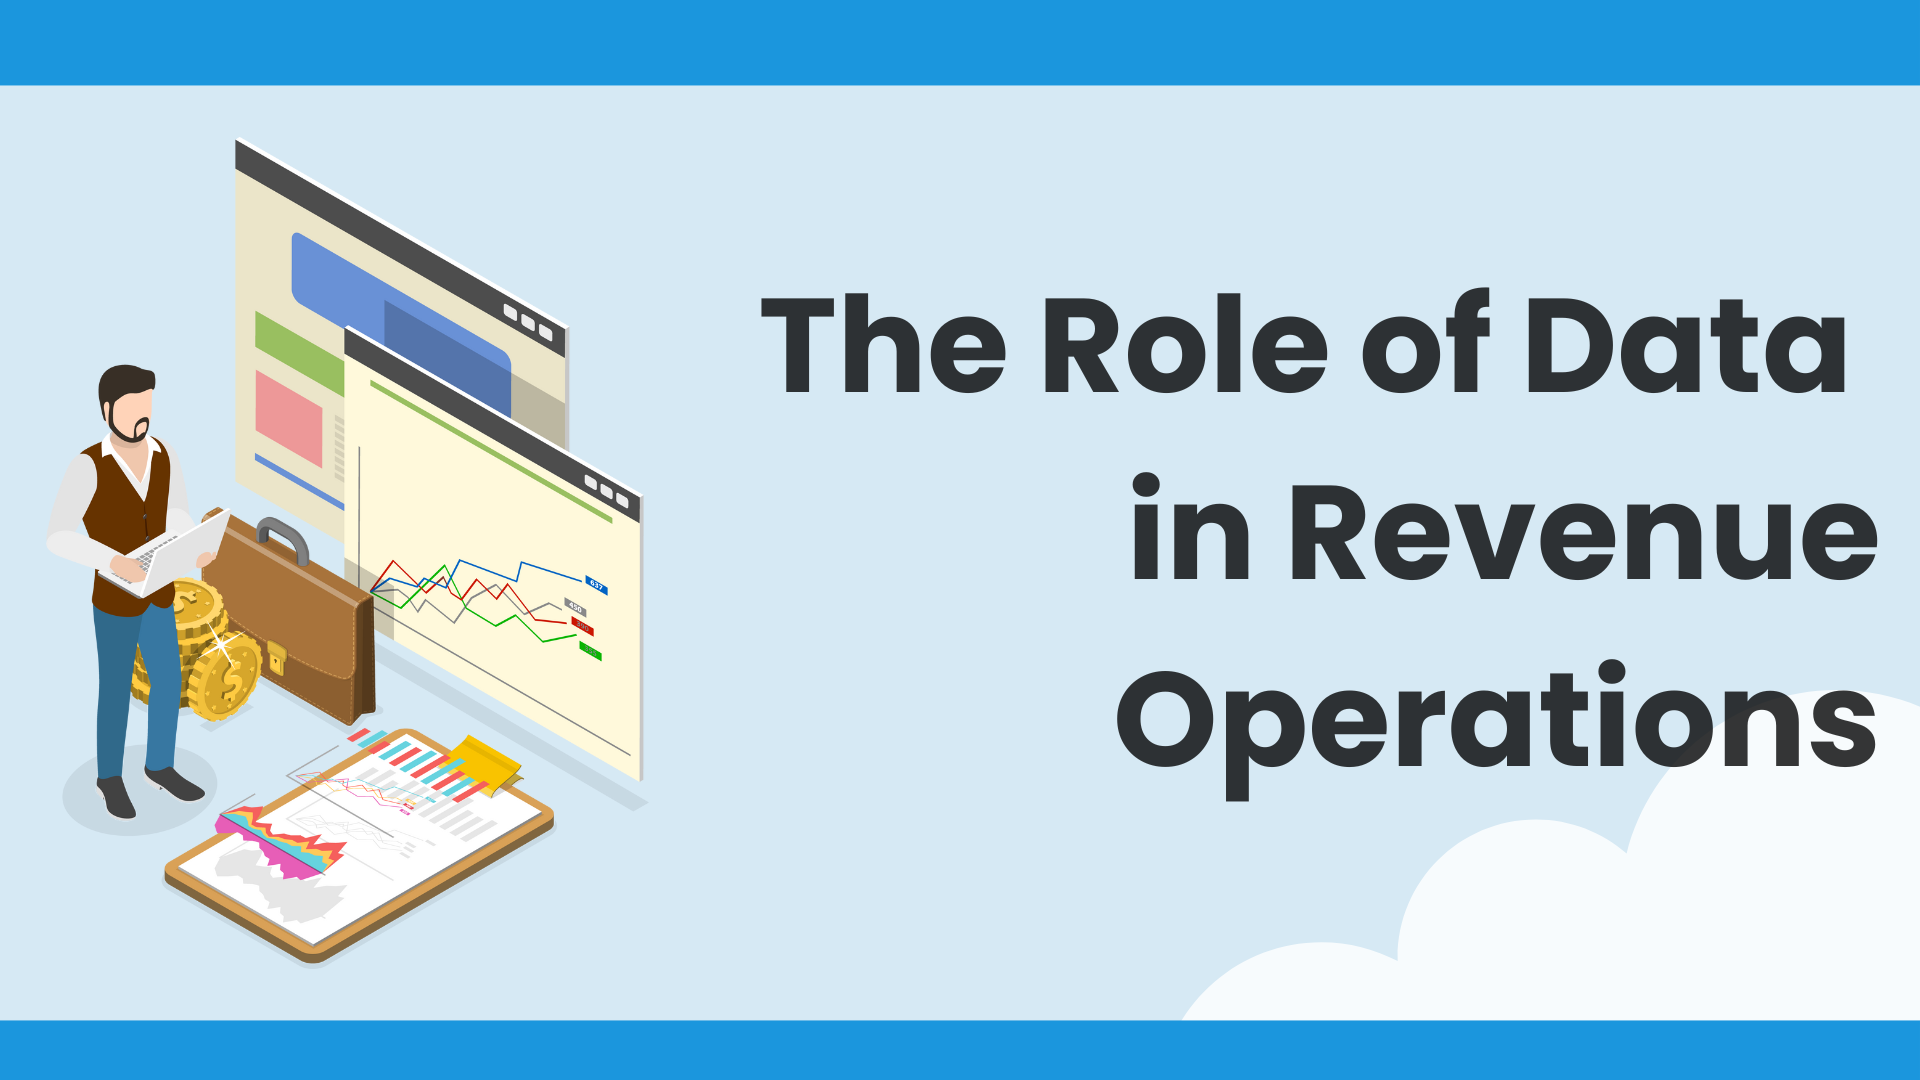 The Role of Data in Revenue Operations